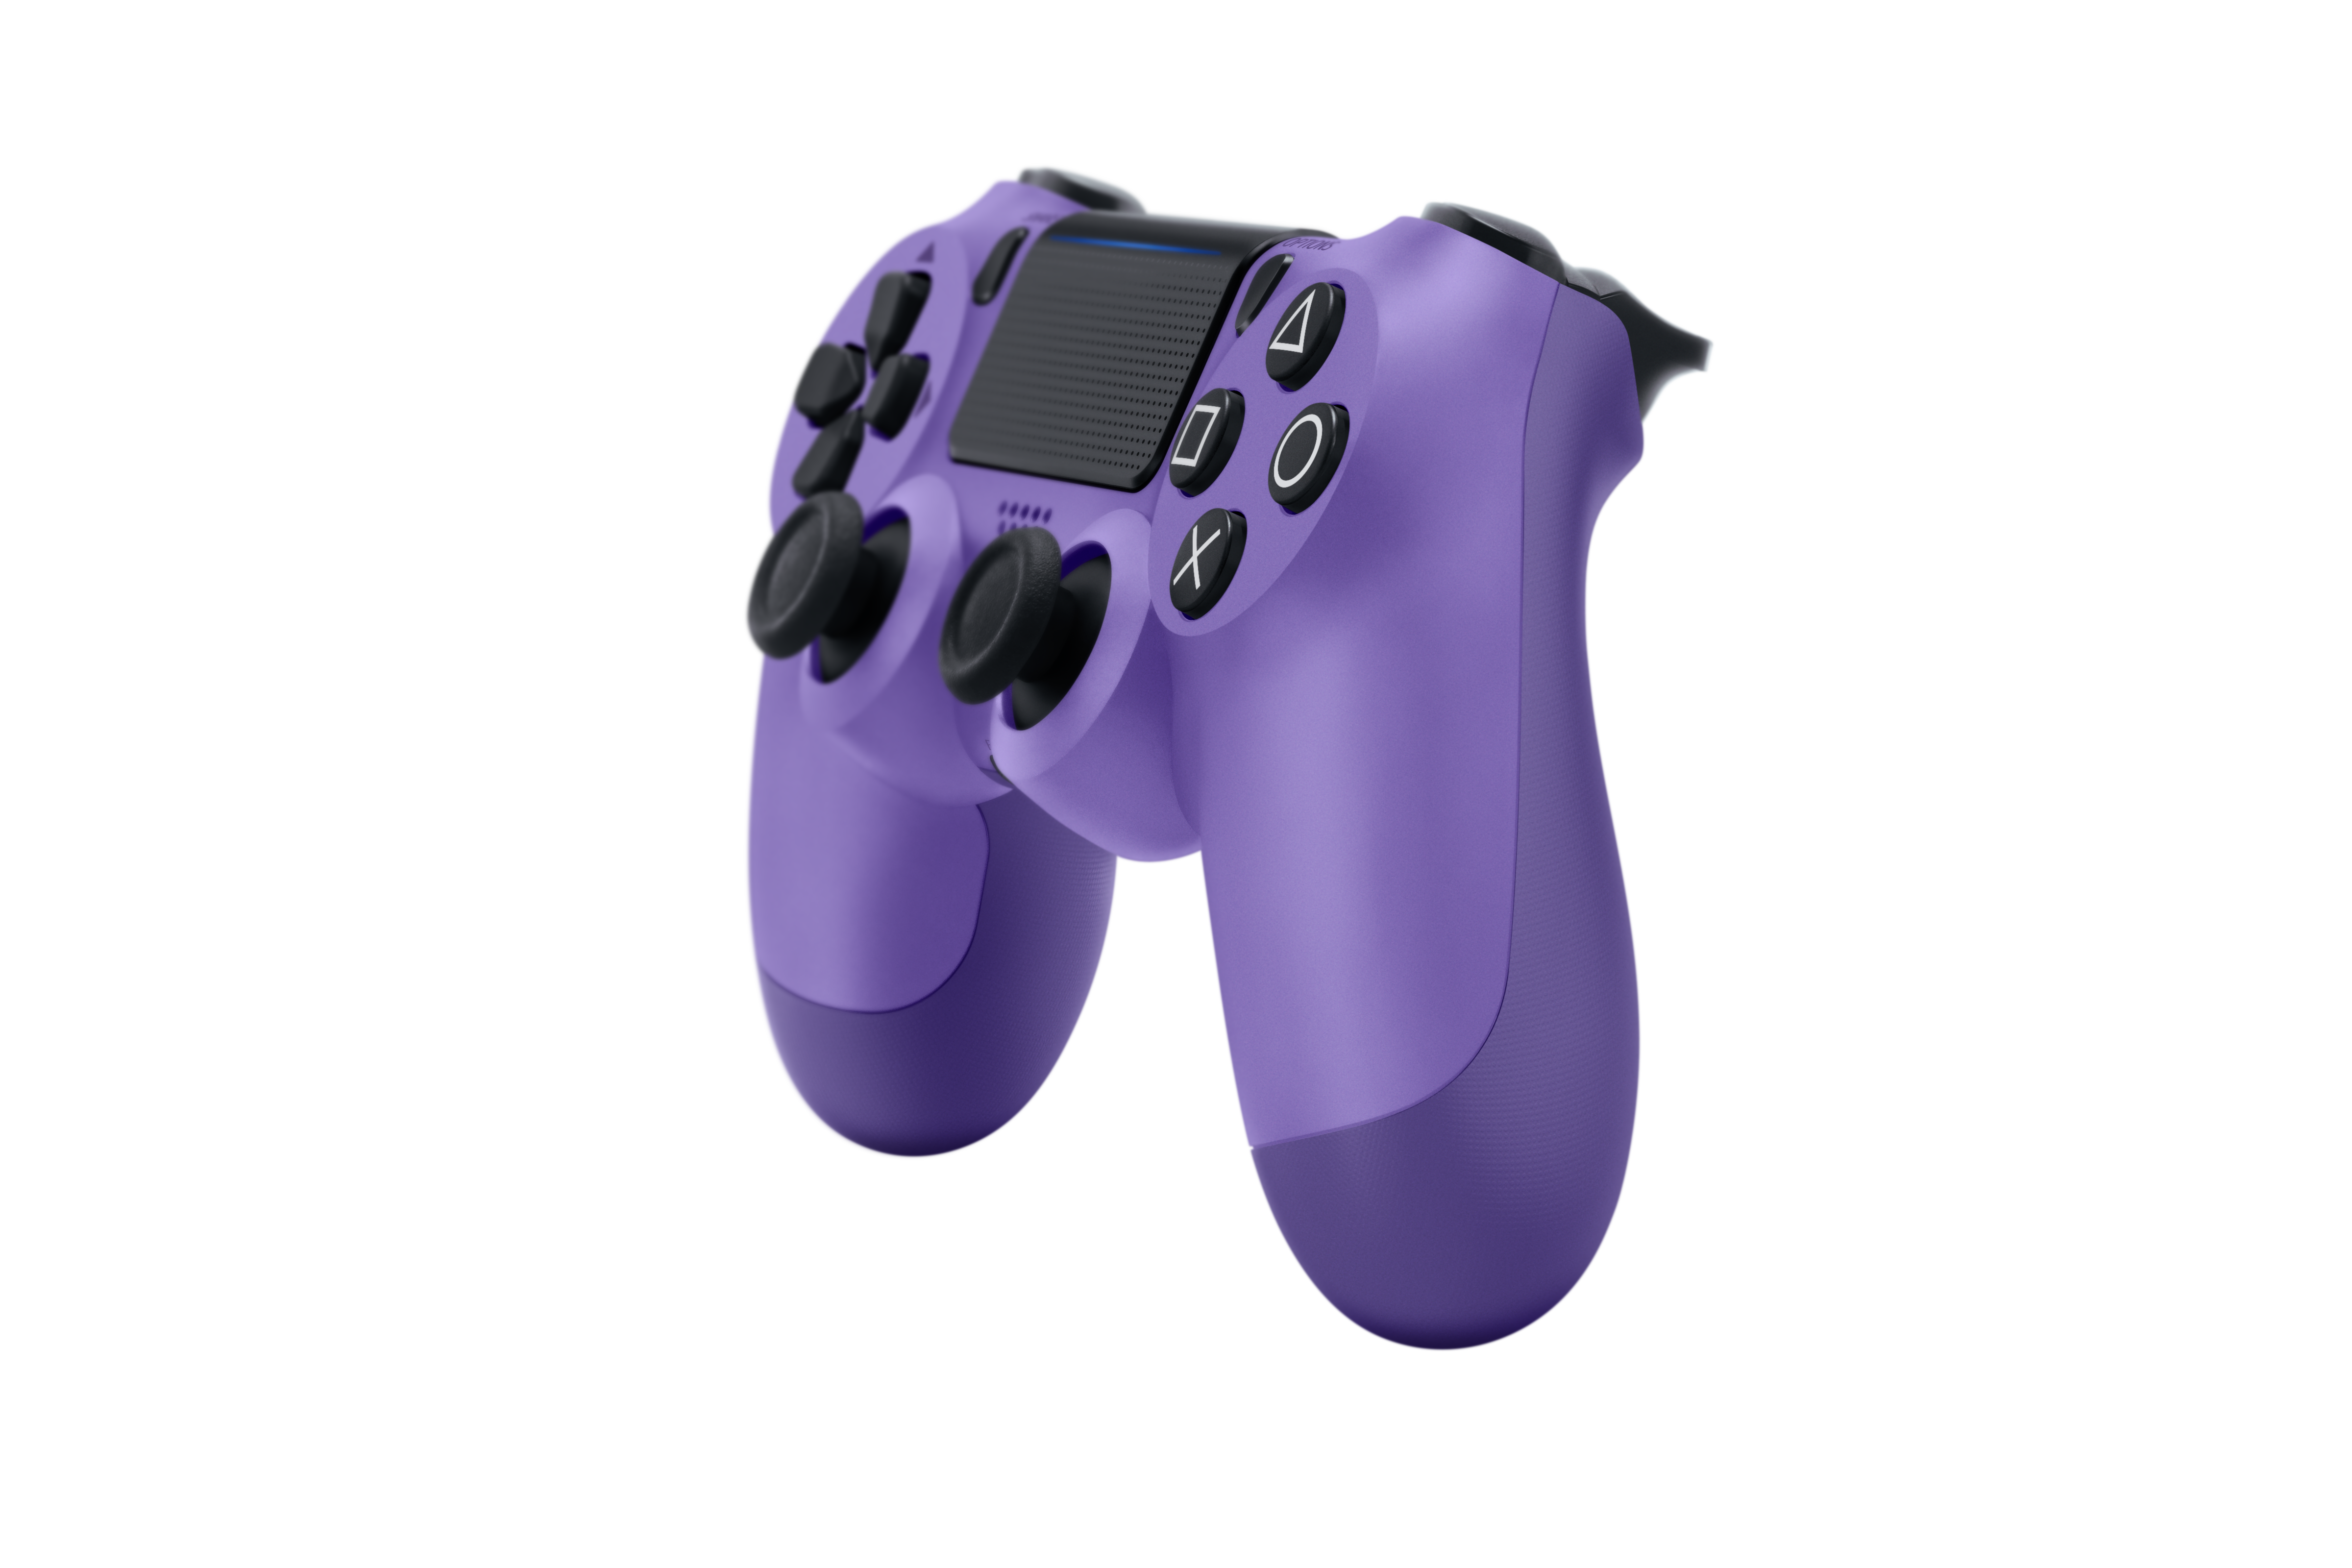 new purple ps4 controller